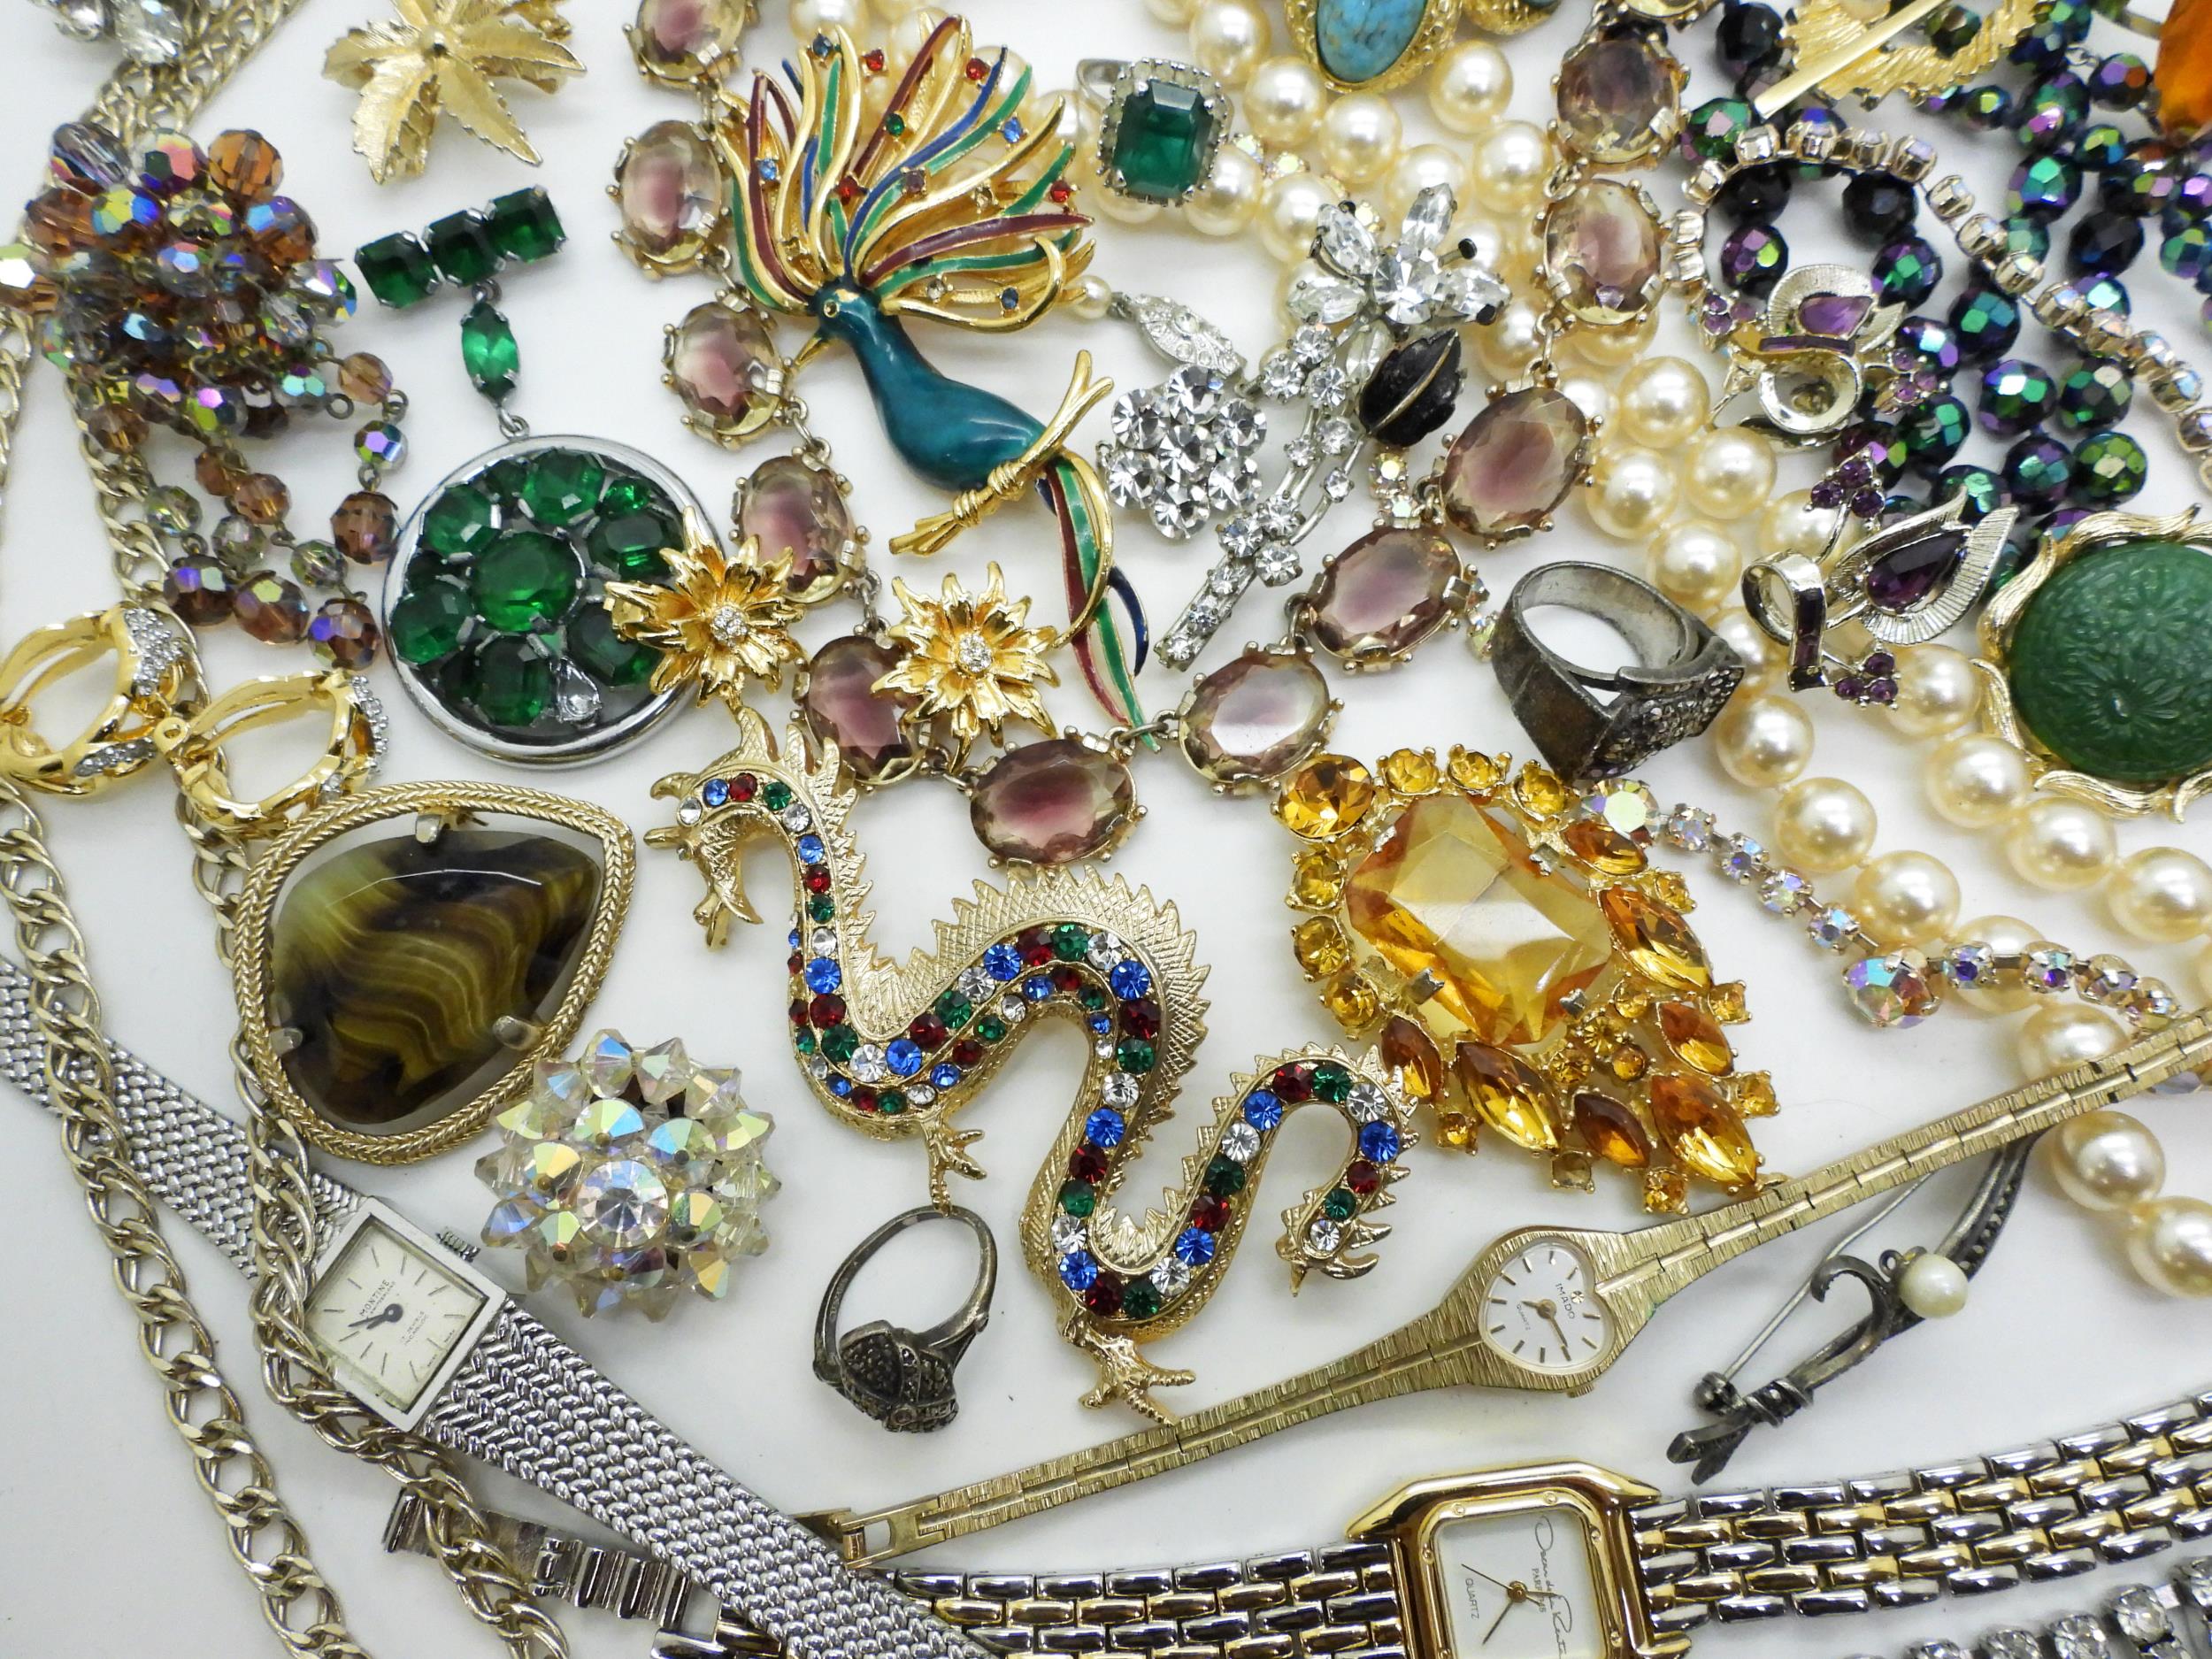 Peacock beads,a watch retailed by Oscar De La Renta, silver and marcasite items, a Montine watch etc - Image 2 of 3